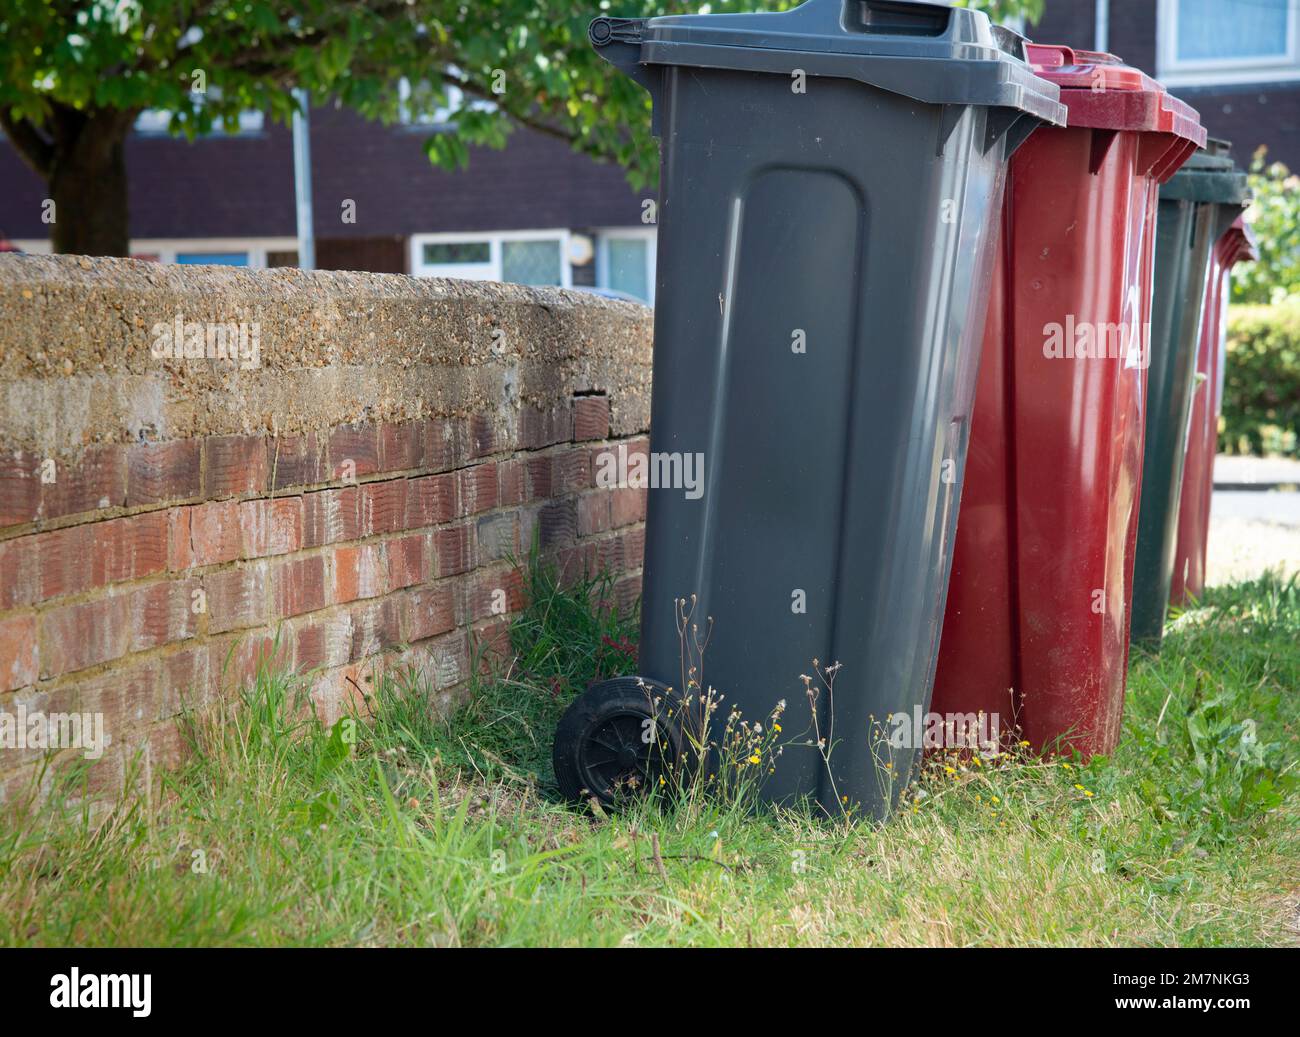 Line of rubbish, recycling or wheelie bins outside a domestic property in Reading, Berkshire, England, UK Stock Photo